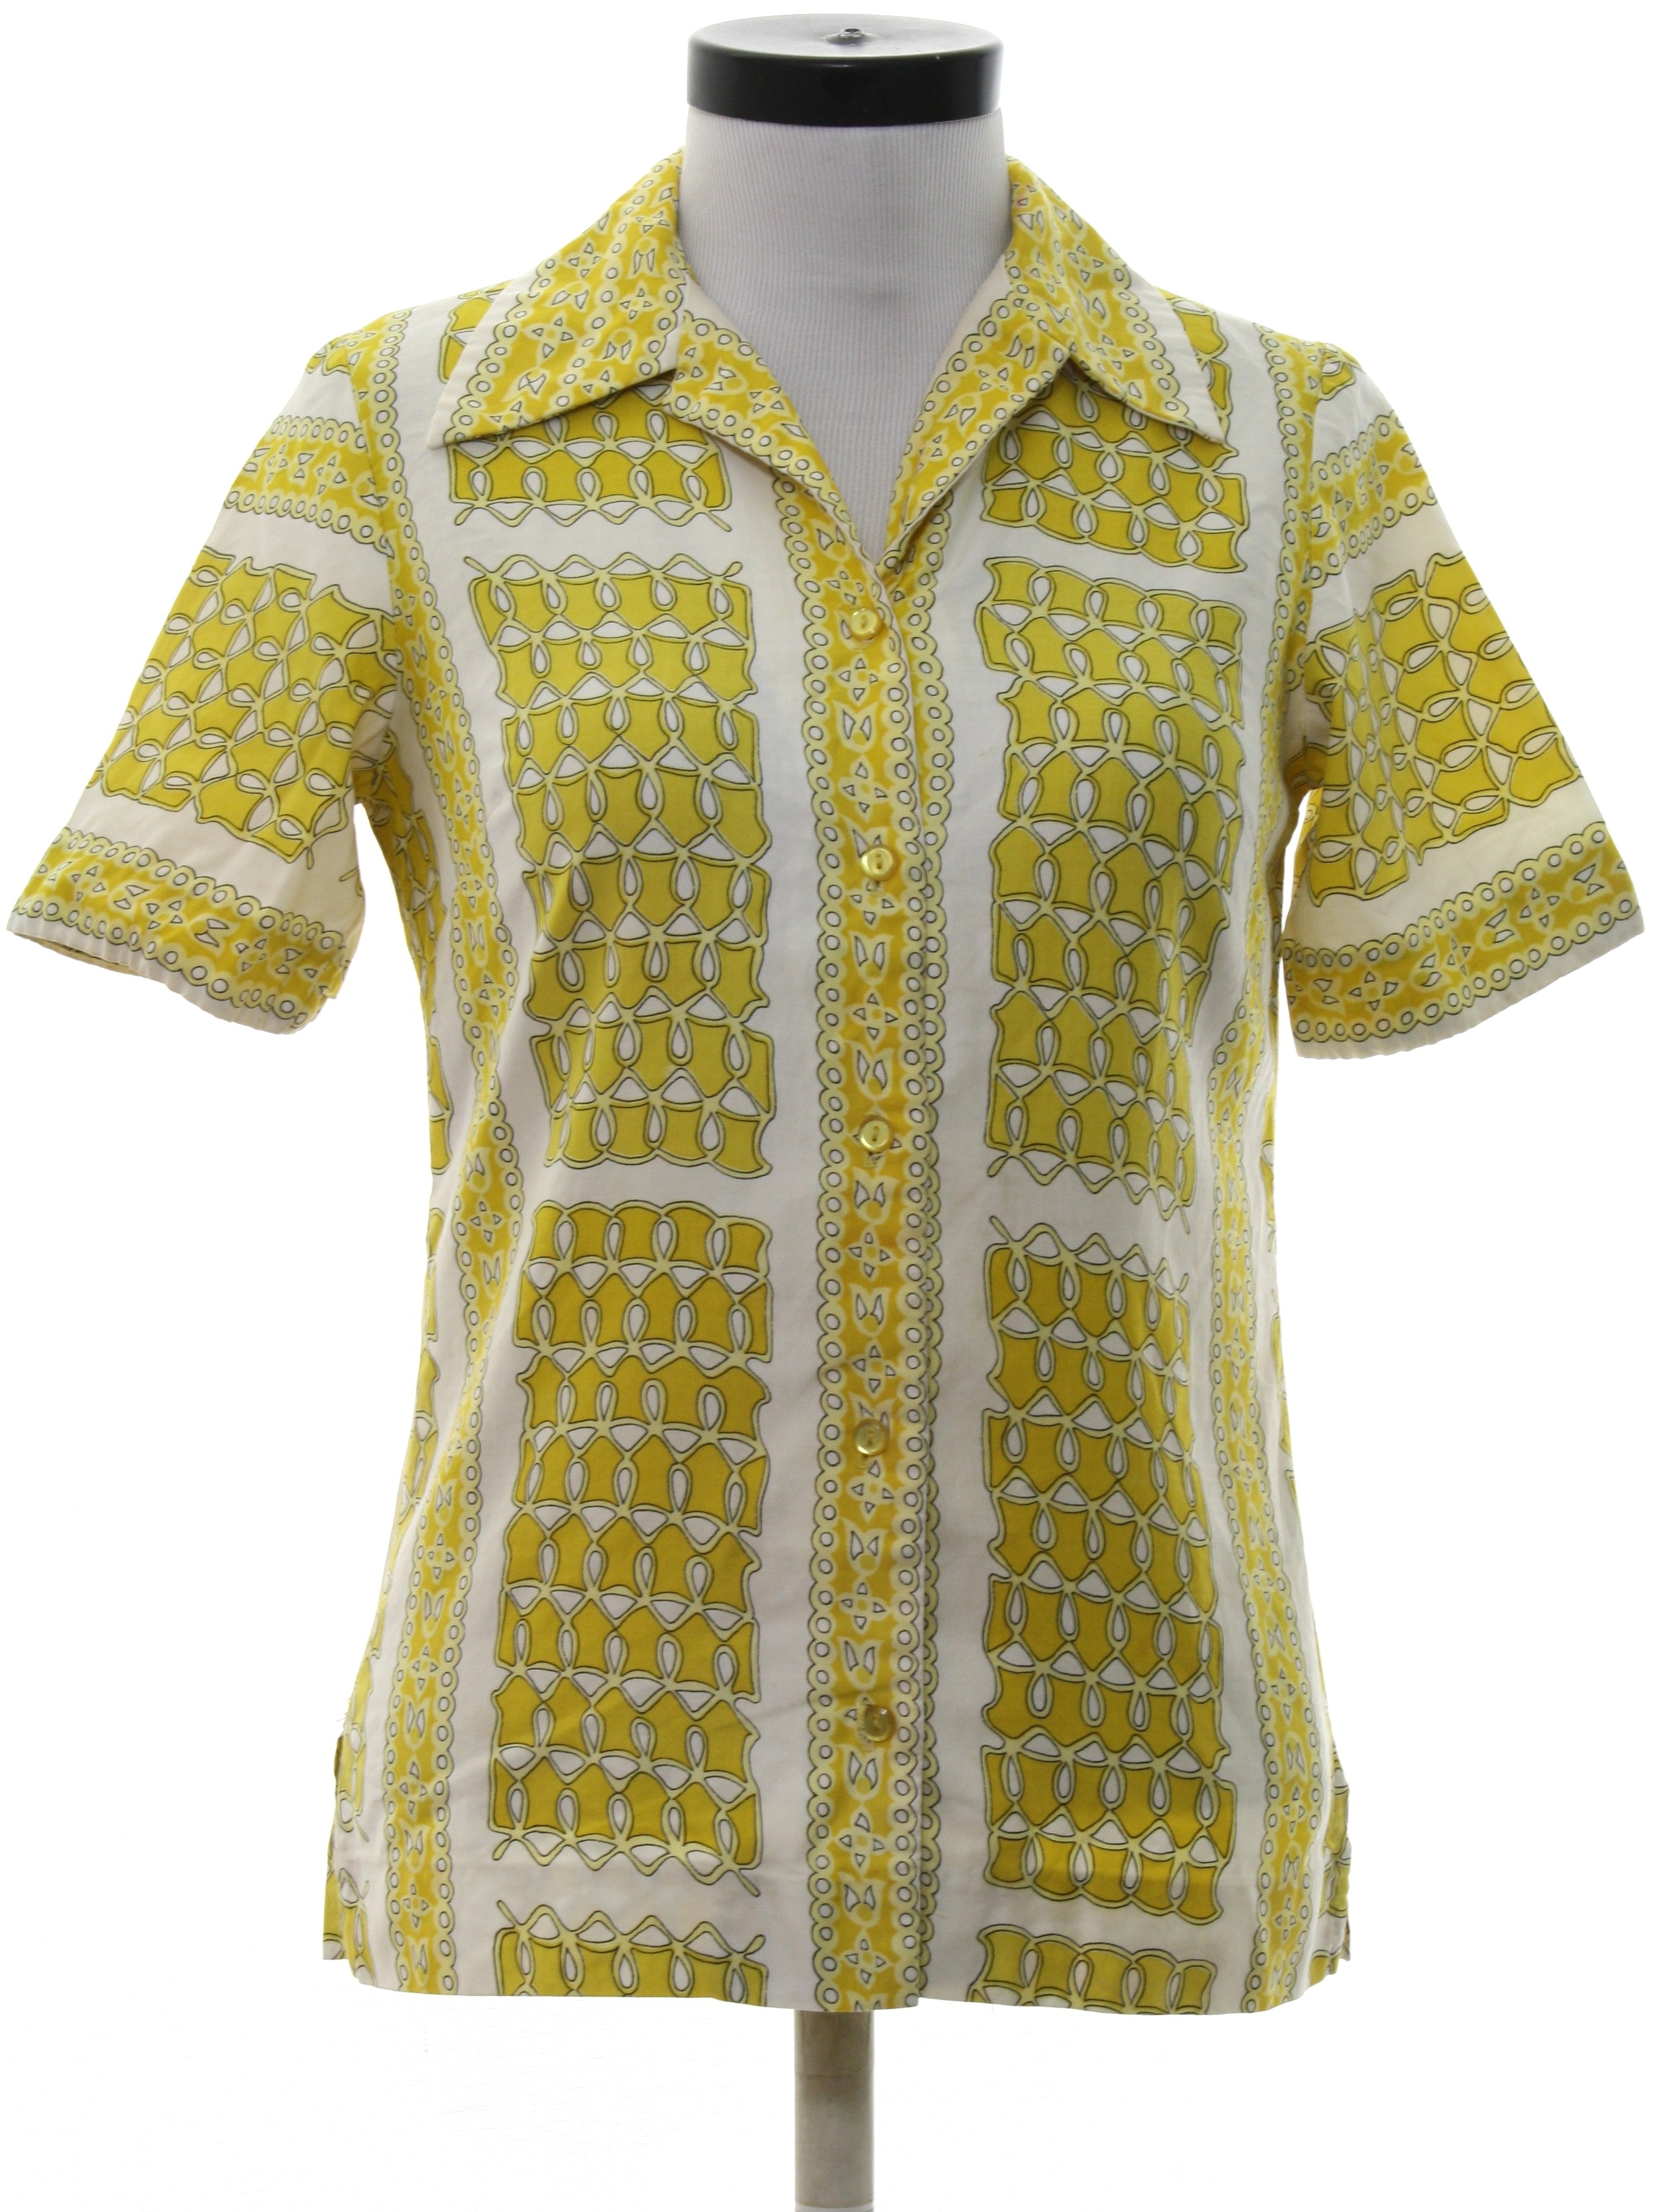 Seventies Vintage Shirt: 70s -Alex Colman- Womens white with yellow ...